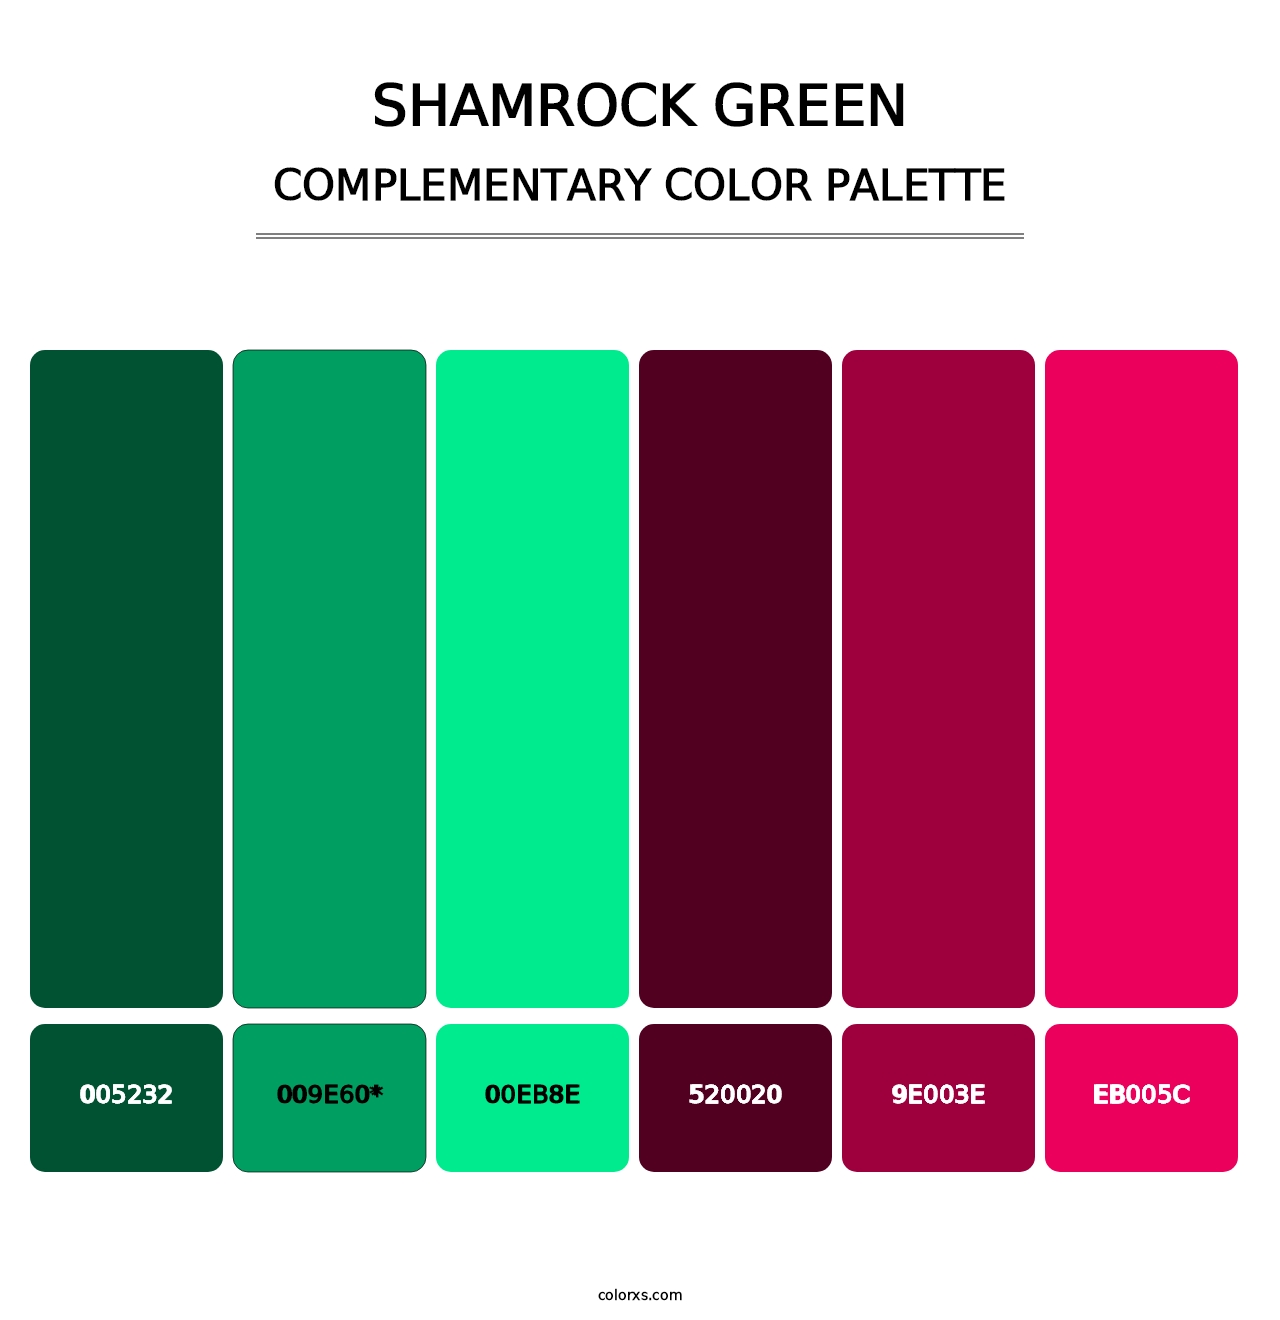 Shamrock Green - Complementary Color Palette